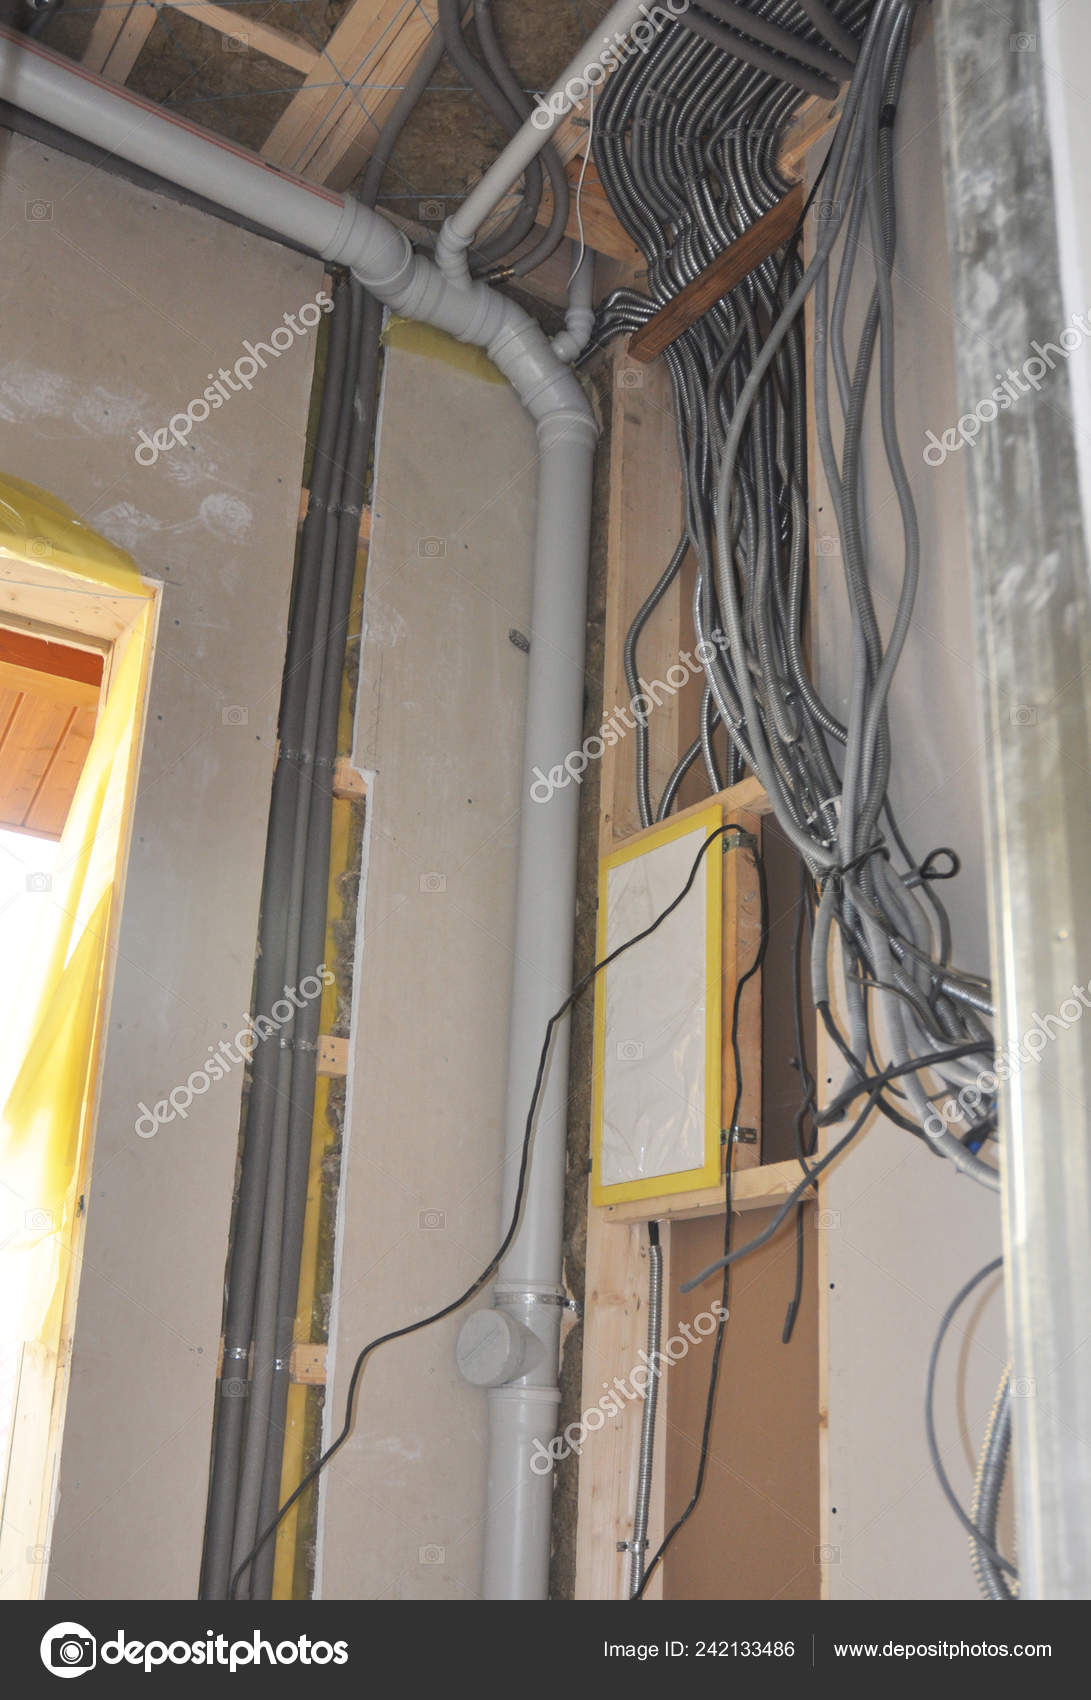 Electrical Wiring New Home Construction Pipeline Plumbing House Construction Stock Photo Image By C Thefutureis 242133486